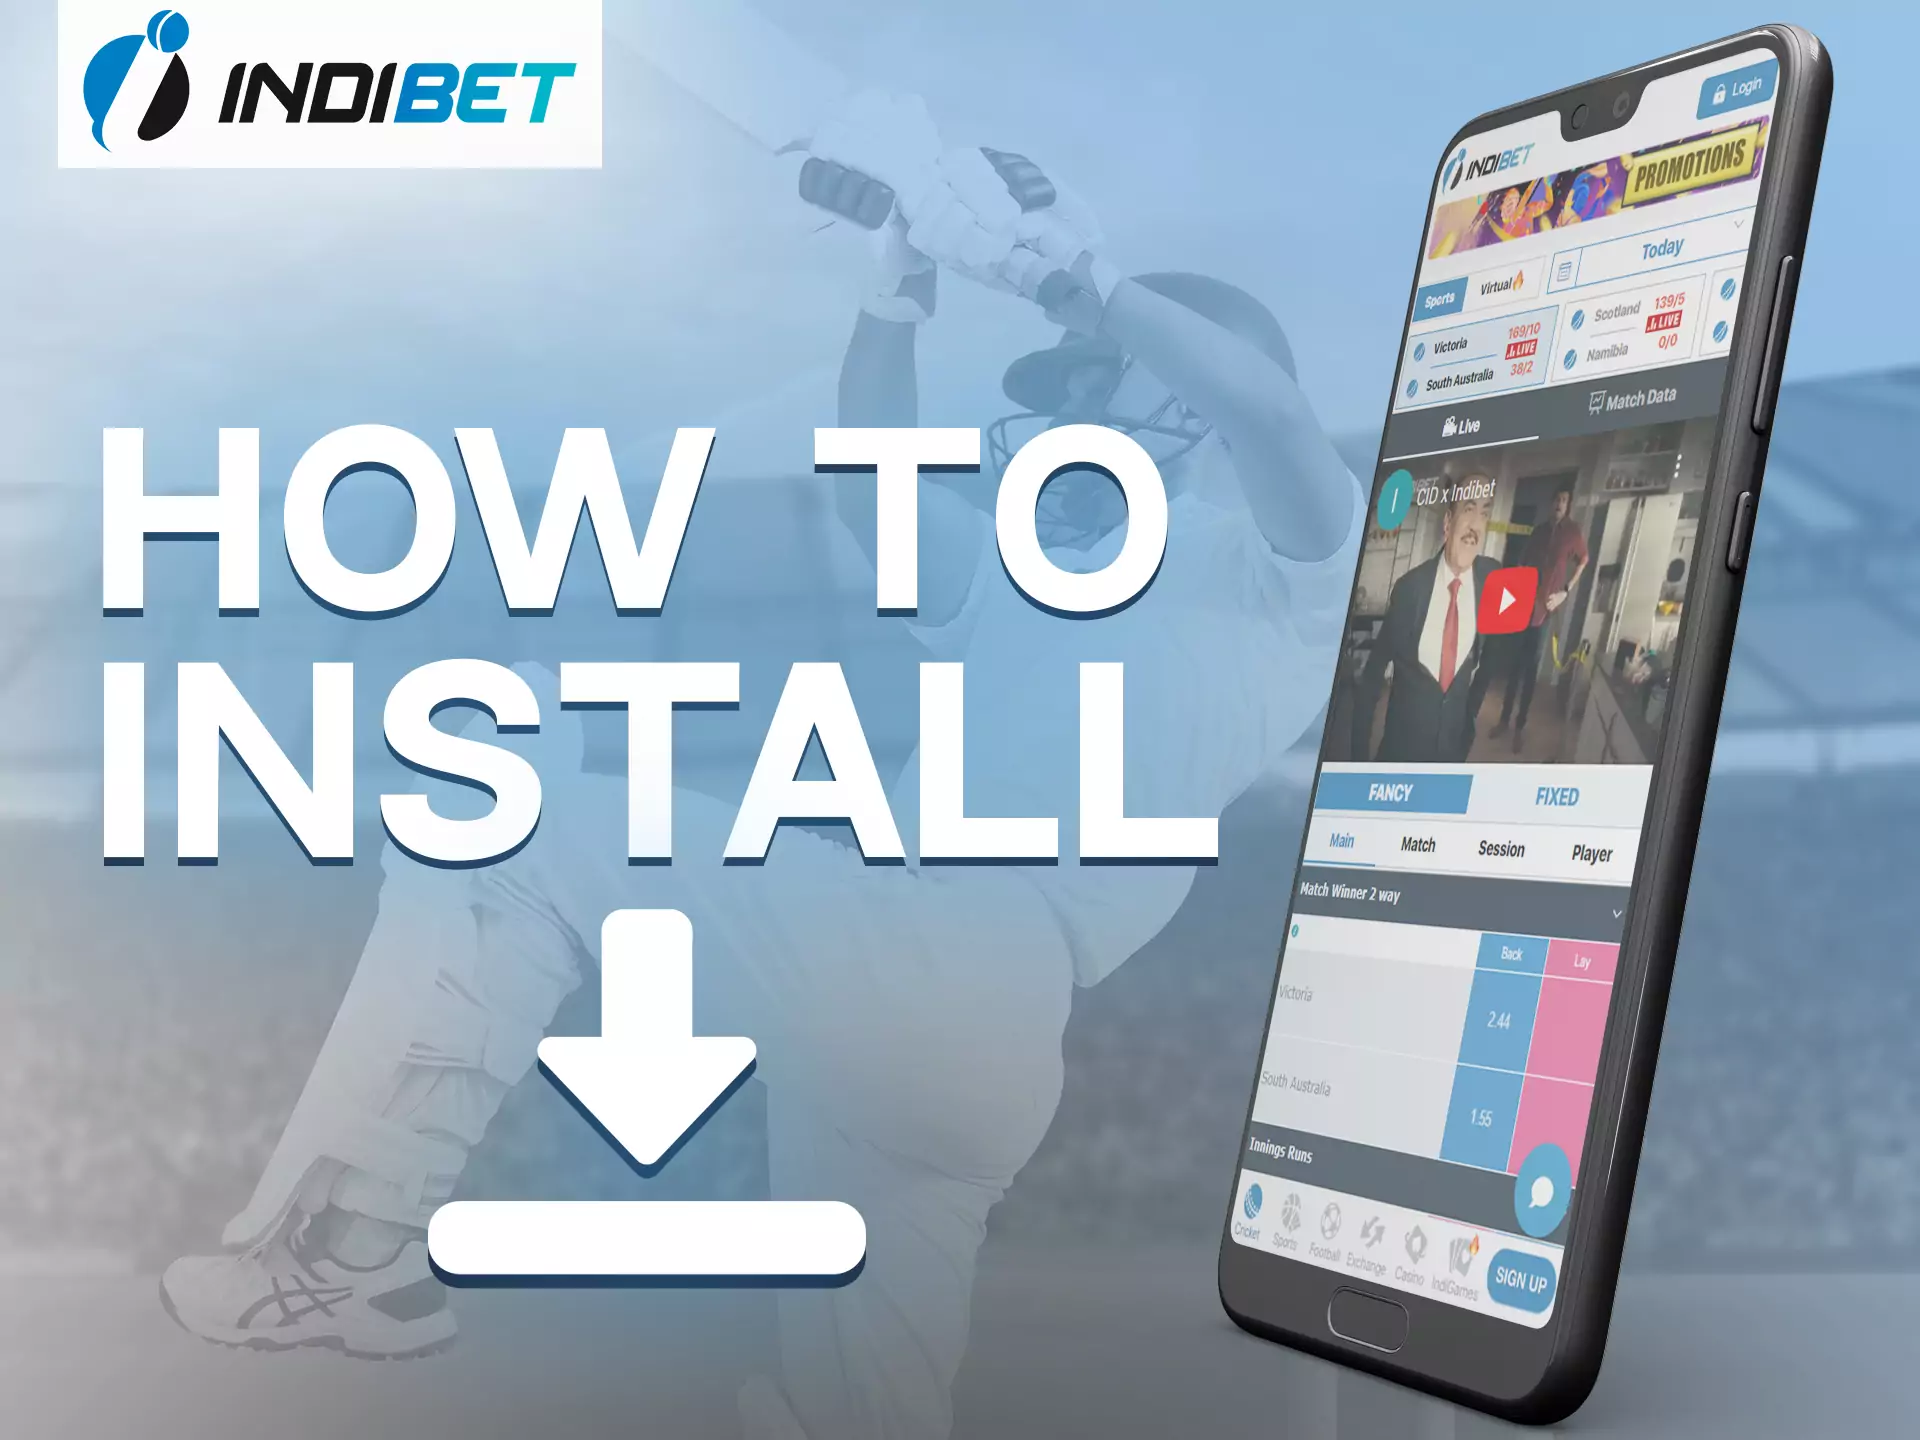 After succesfull download of Indibet app you can start installation.